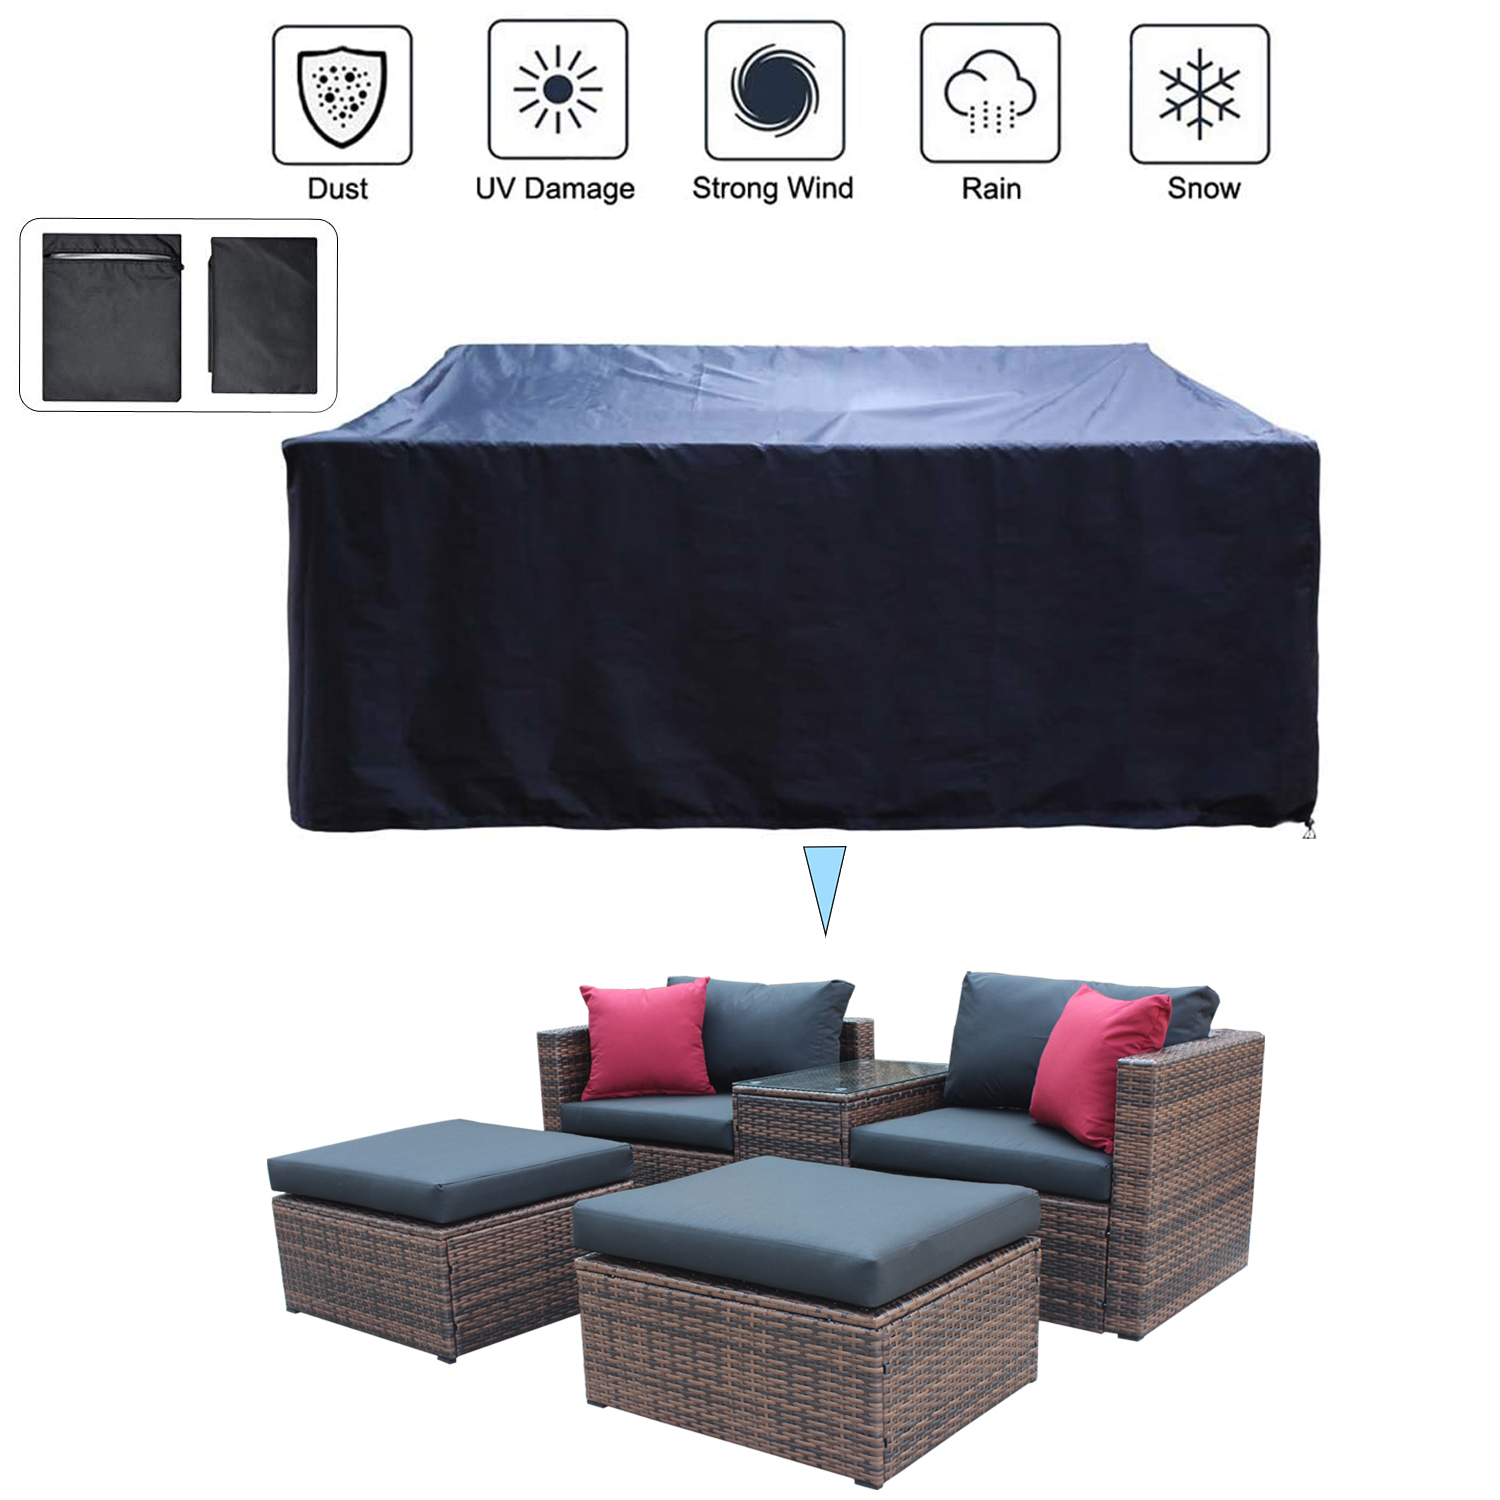 Gray Wicker Patio Seating Sets, SESSLIFE 5-Piece Outdoor Sectional Sofa Set with Tea Table, Furniture Cover and Soft Cushions, All-Weather Outdoor Table and Chairs Set, TE2660 - image 5 of 5